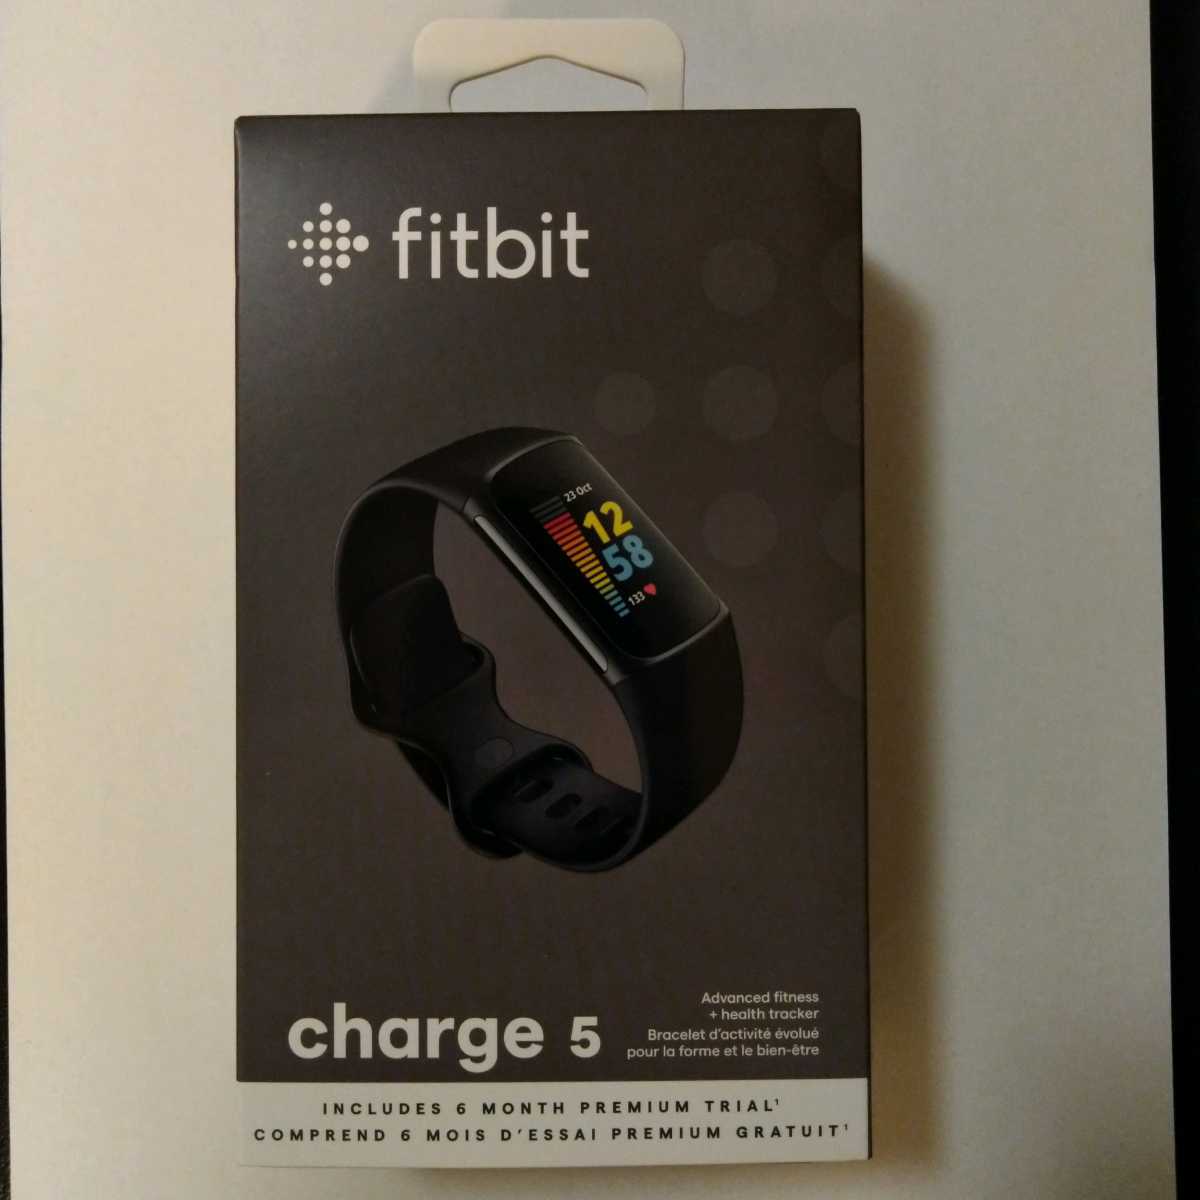 Fitbit Fitbit Charge 5 ブラック/グラファイト 新品未開封